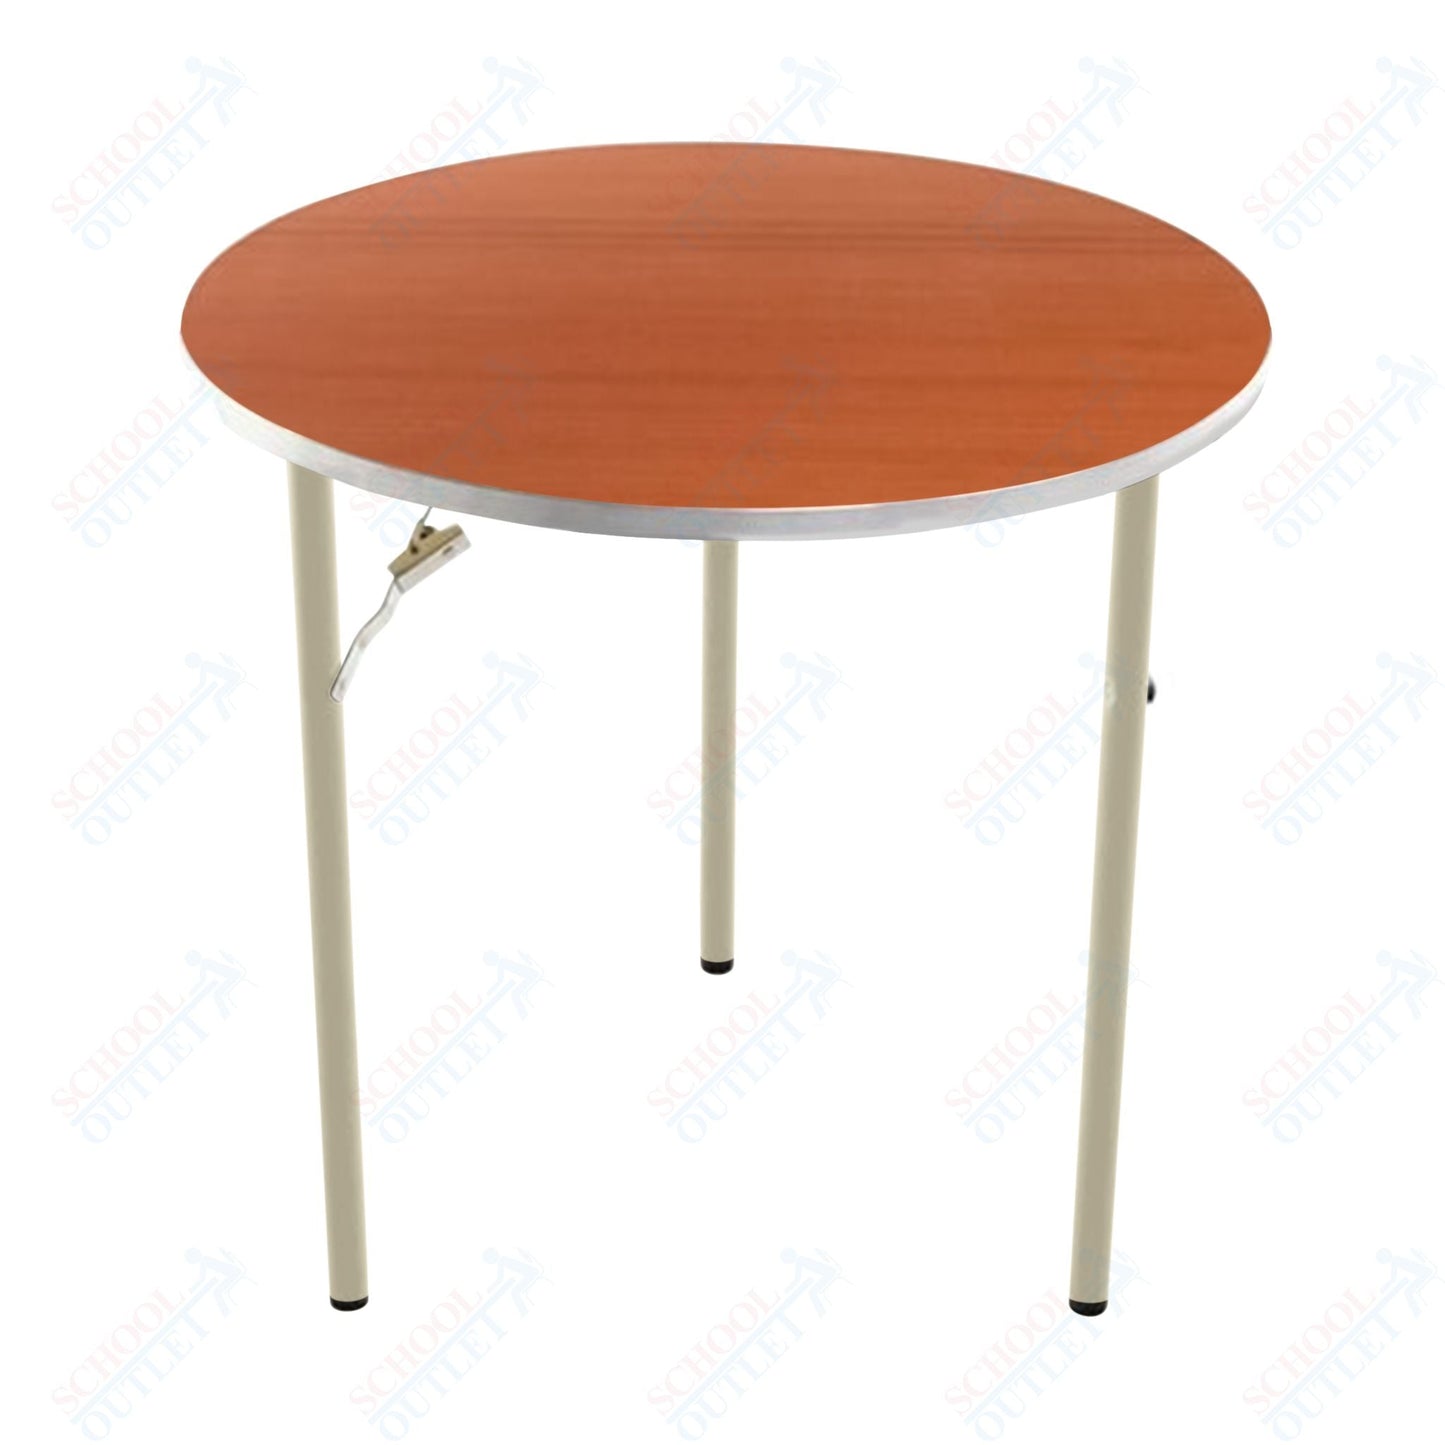 AmTab Folding Table - Plywood Stained and Sealed - Aluminum Edge - Round - 36" Diameter x 29"H (AmTab AMT - R36PA) - SchoolOutlet